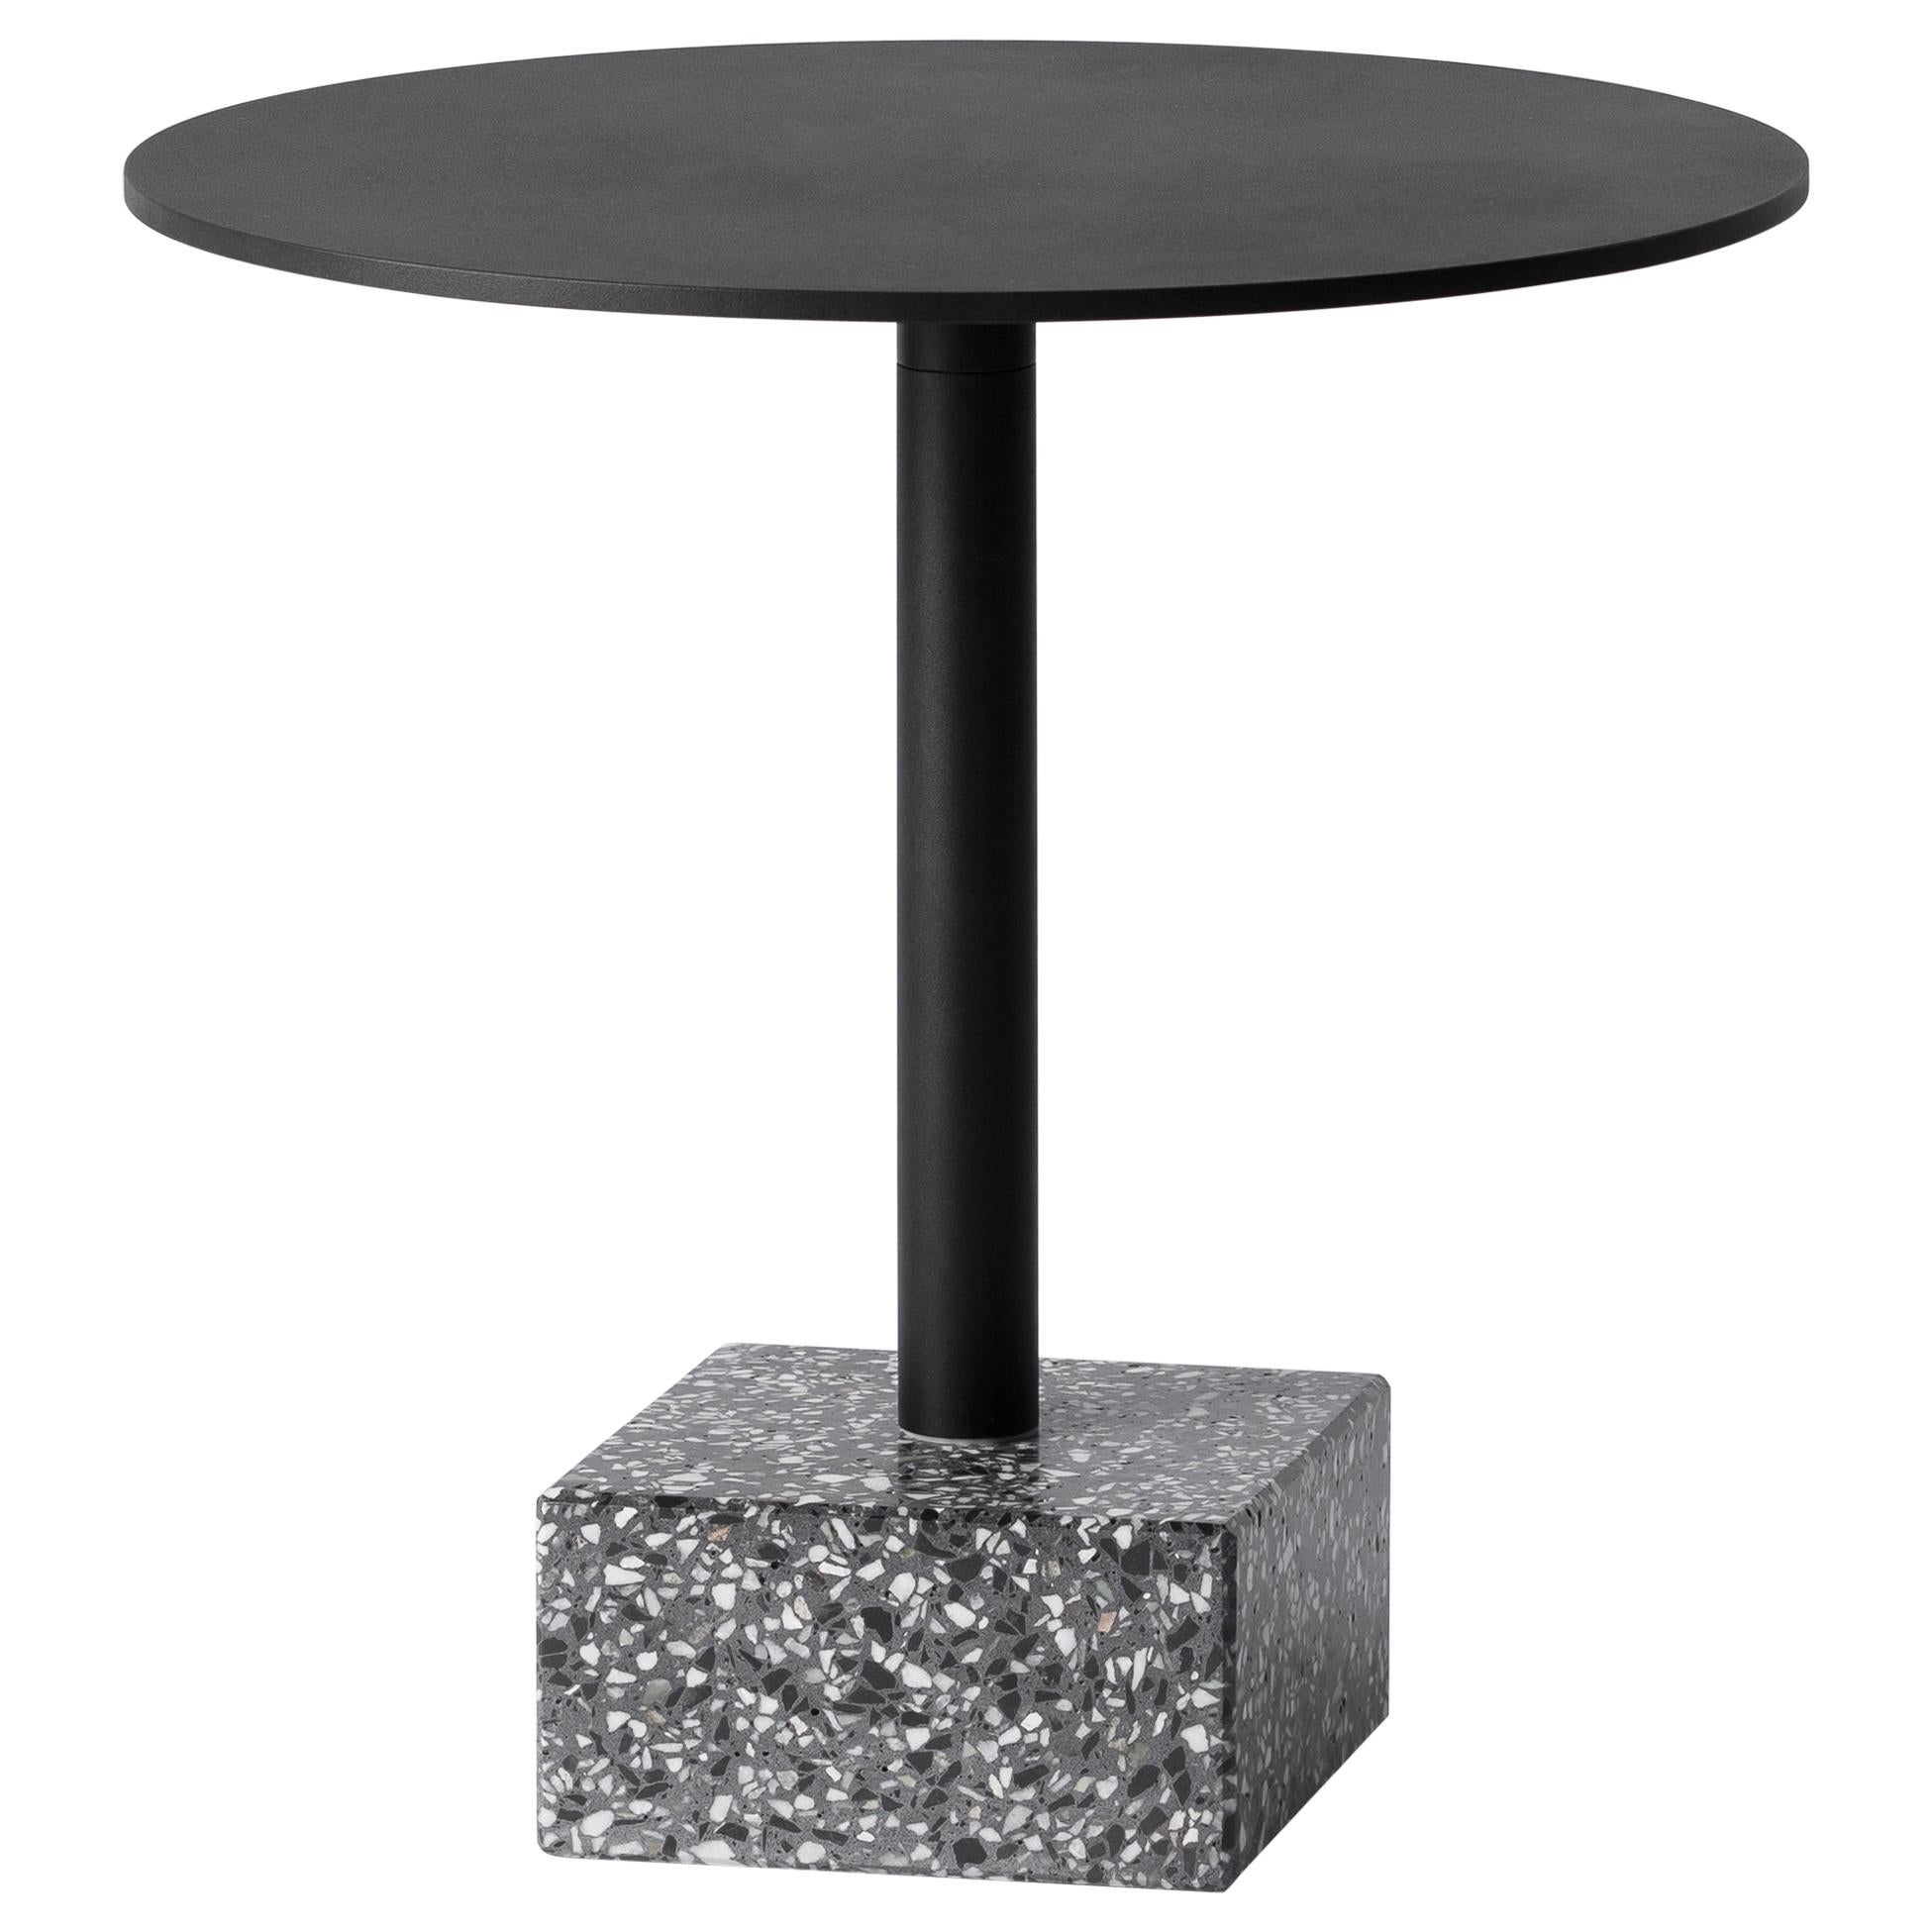 Terrazo and Aluminum Side Table, ‘Ding, ’ Black, from Terrazo Collection by Bentu